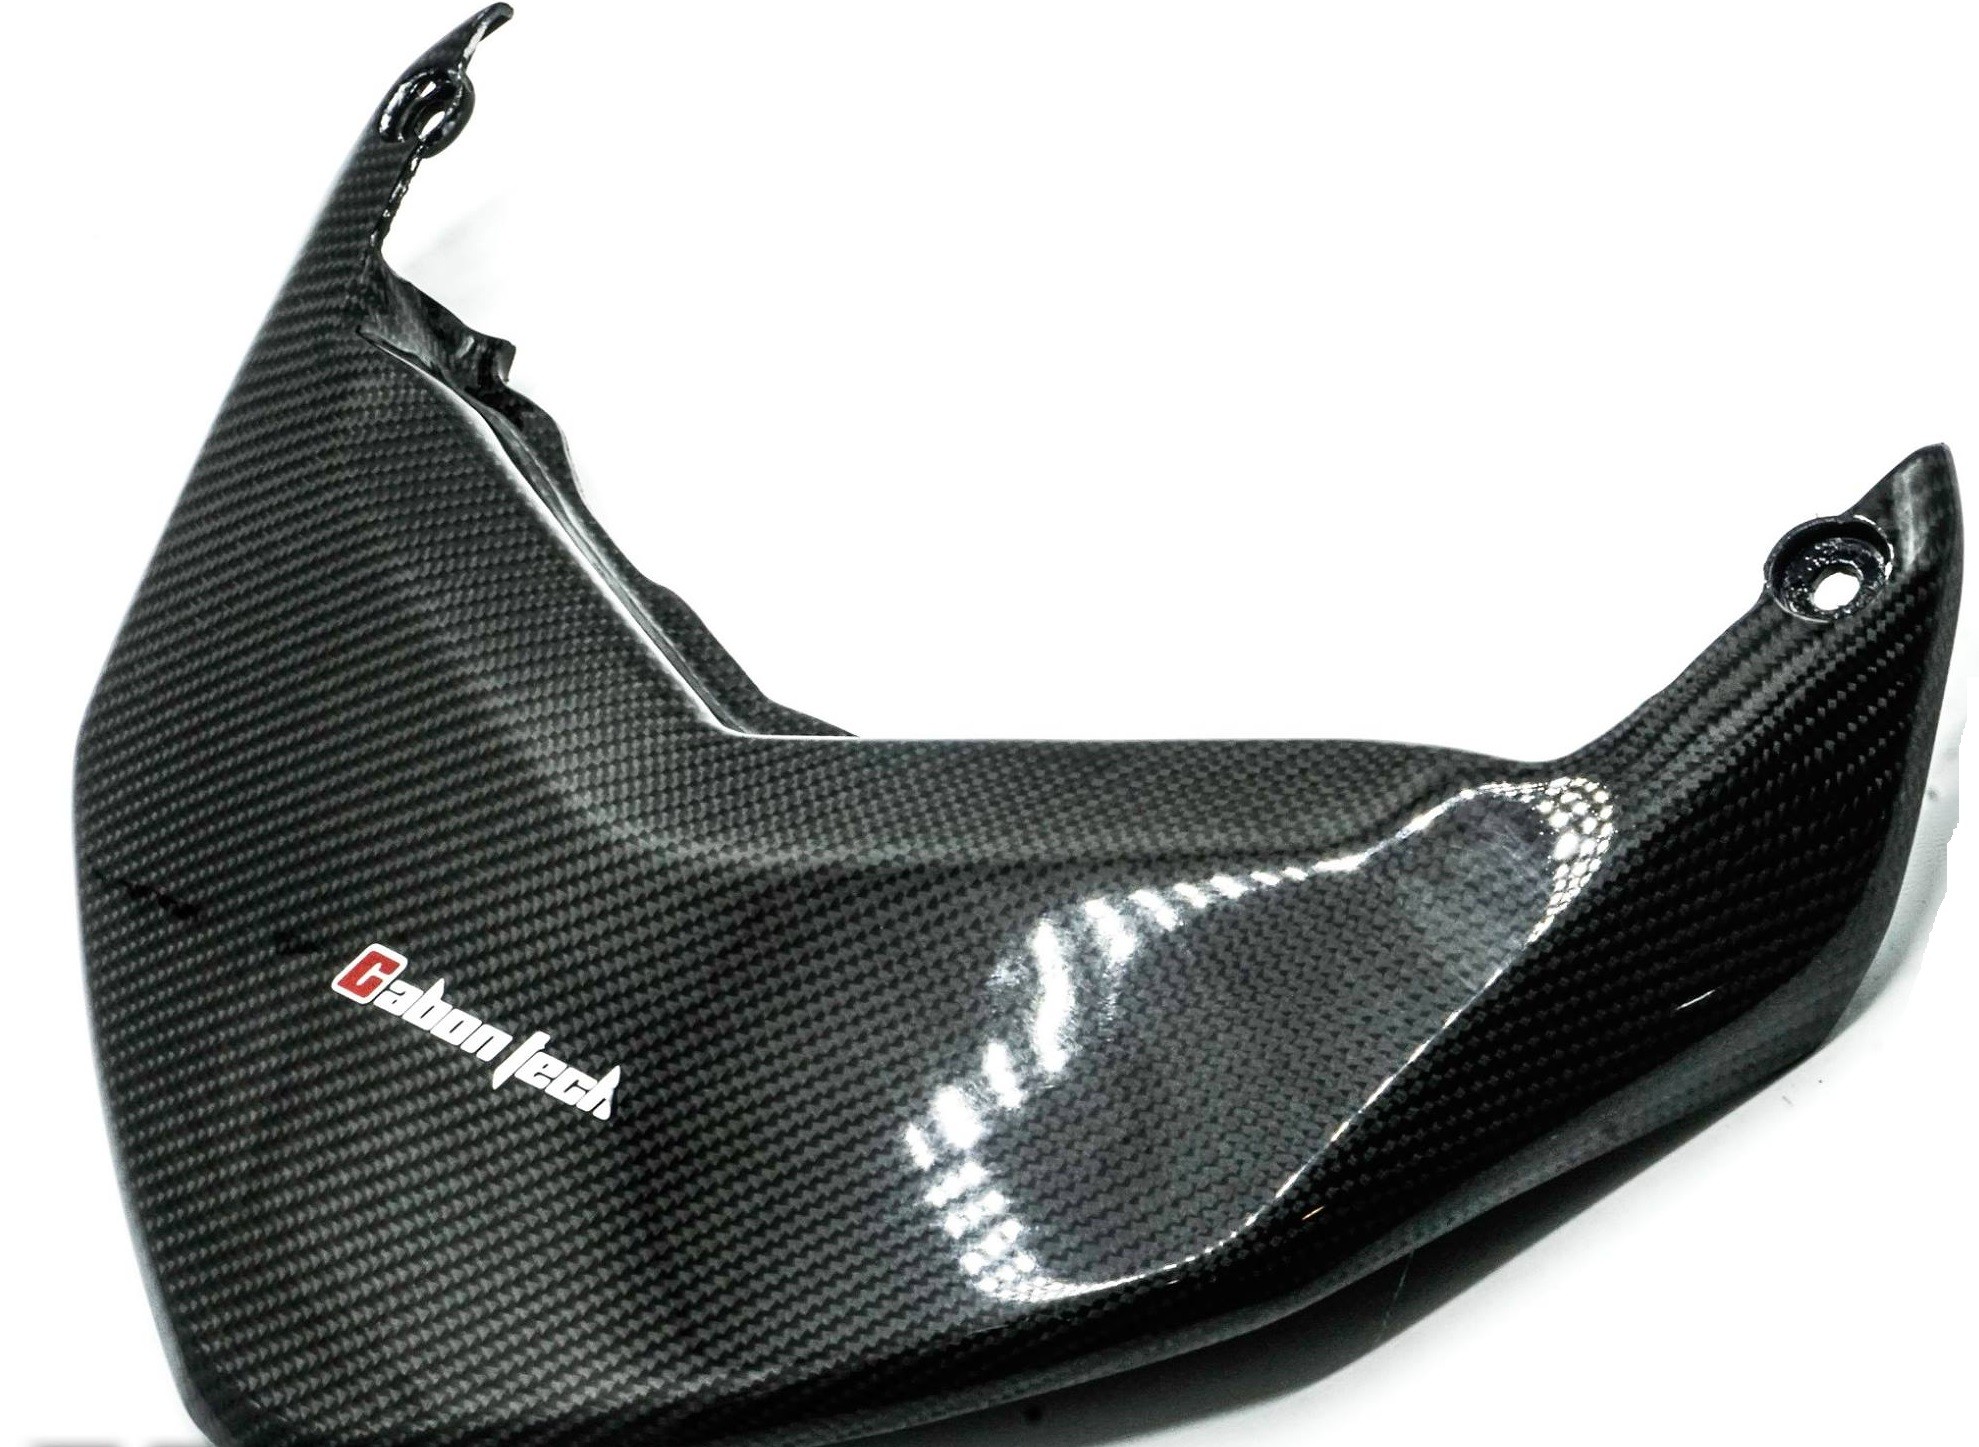 CARBON REAR SEAT COVER FOR All New YAMAHA NMAX 2020